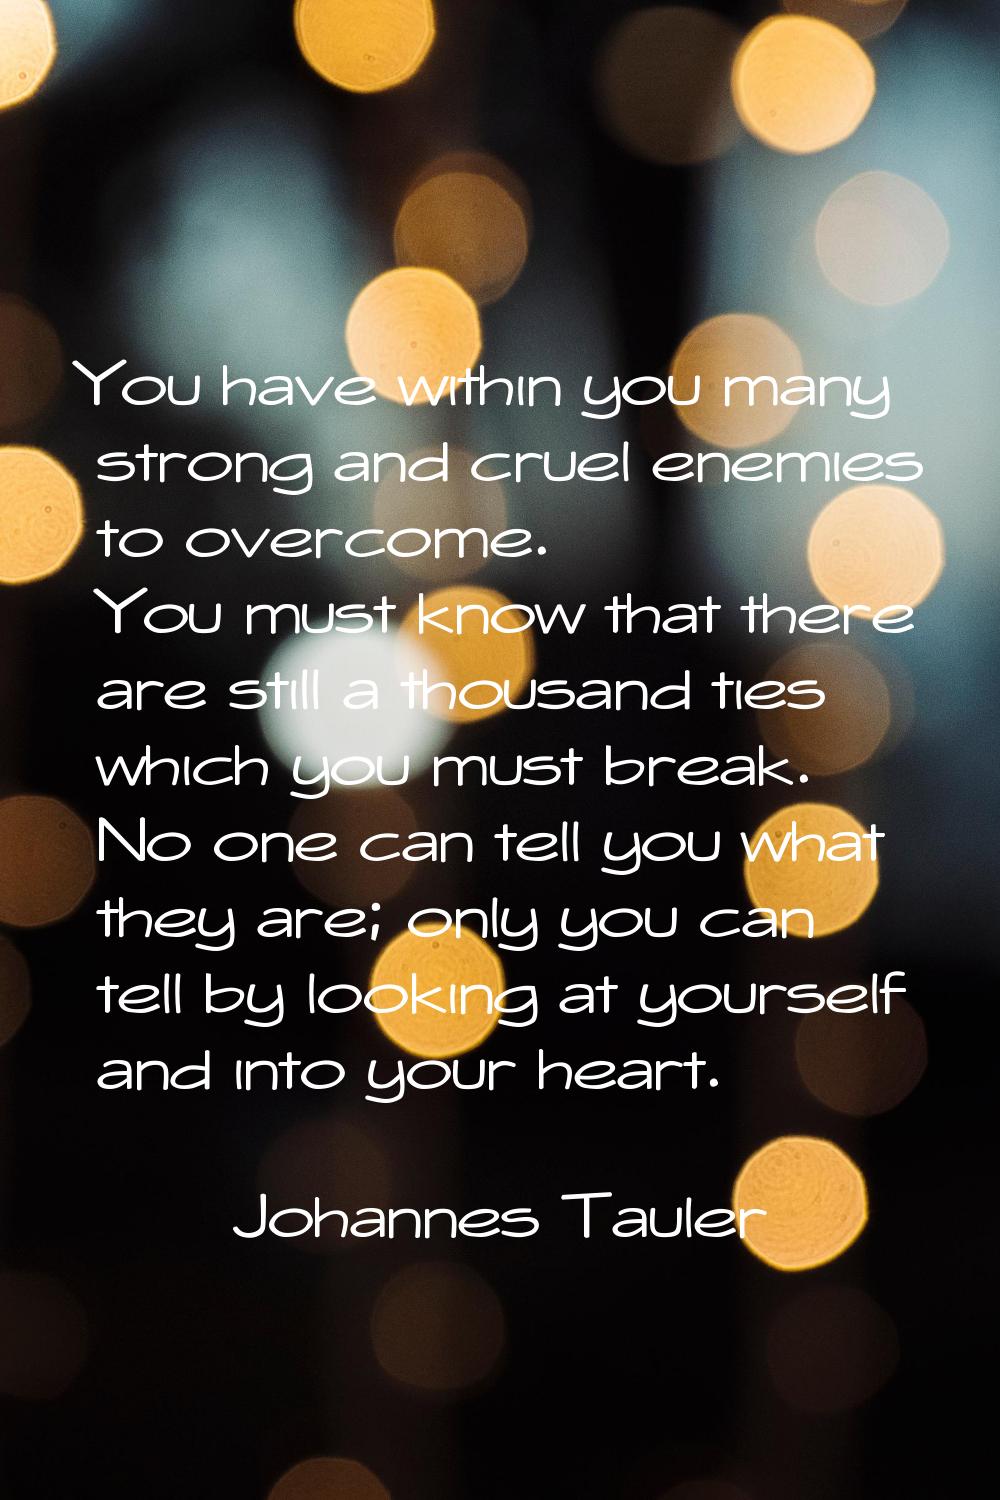 You have within you many strong and cruel enemies to overcome. You must know that there are still a